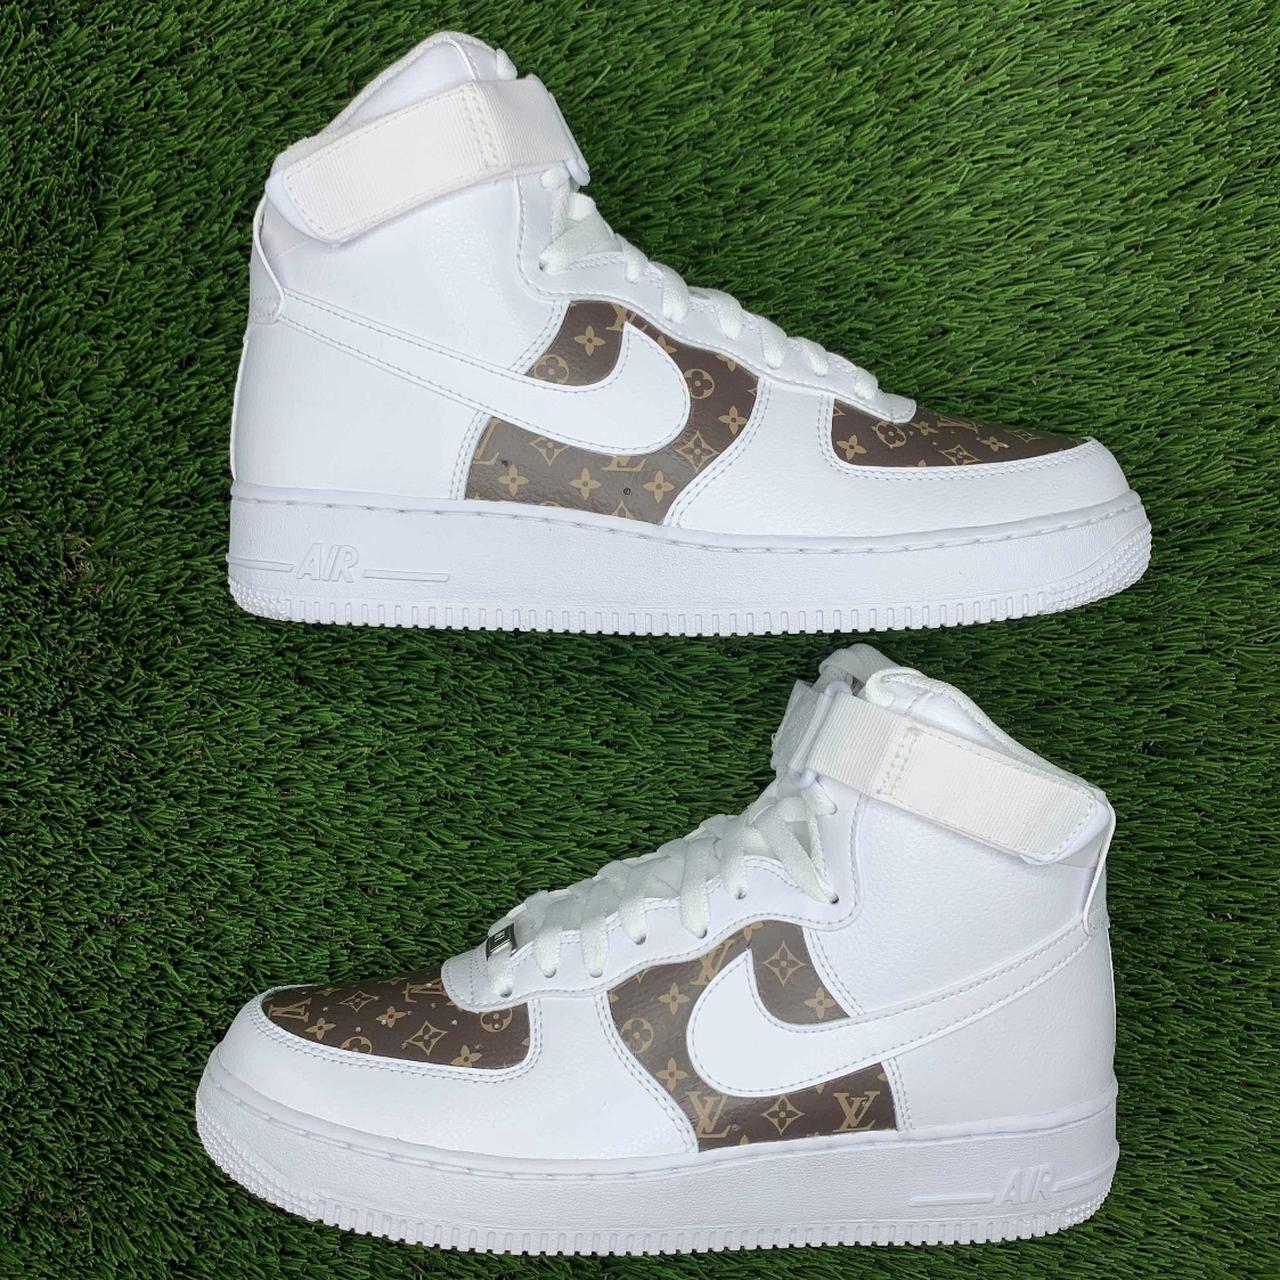 LOUIS VUITTON AIR FORCE 1 Any size available Always - Depop